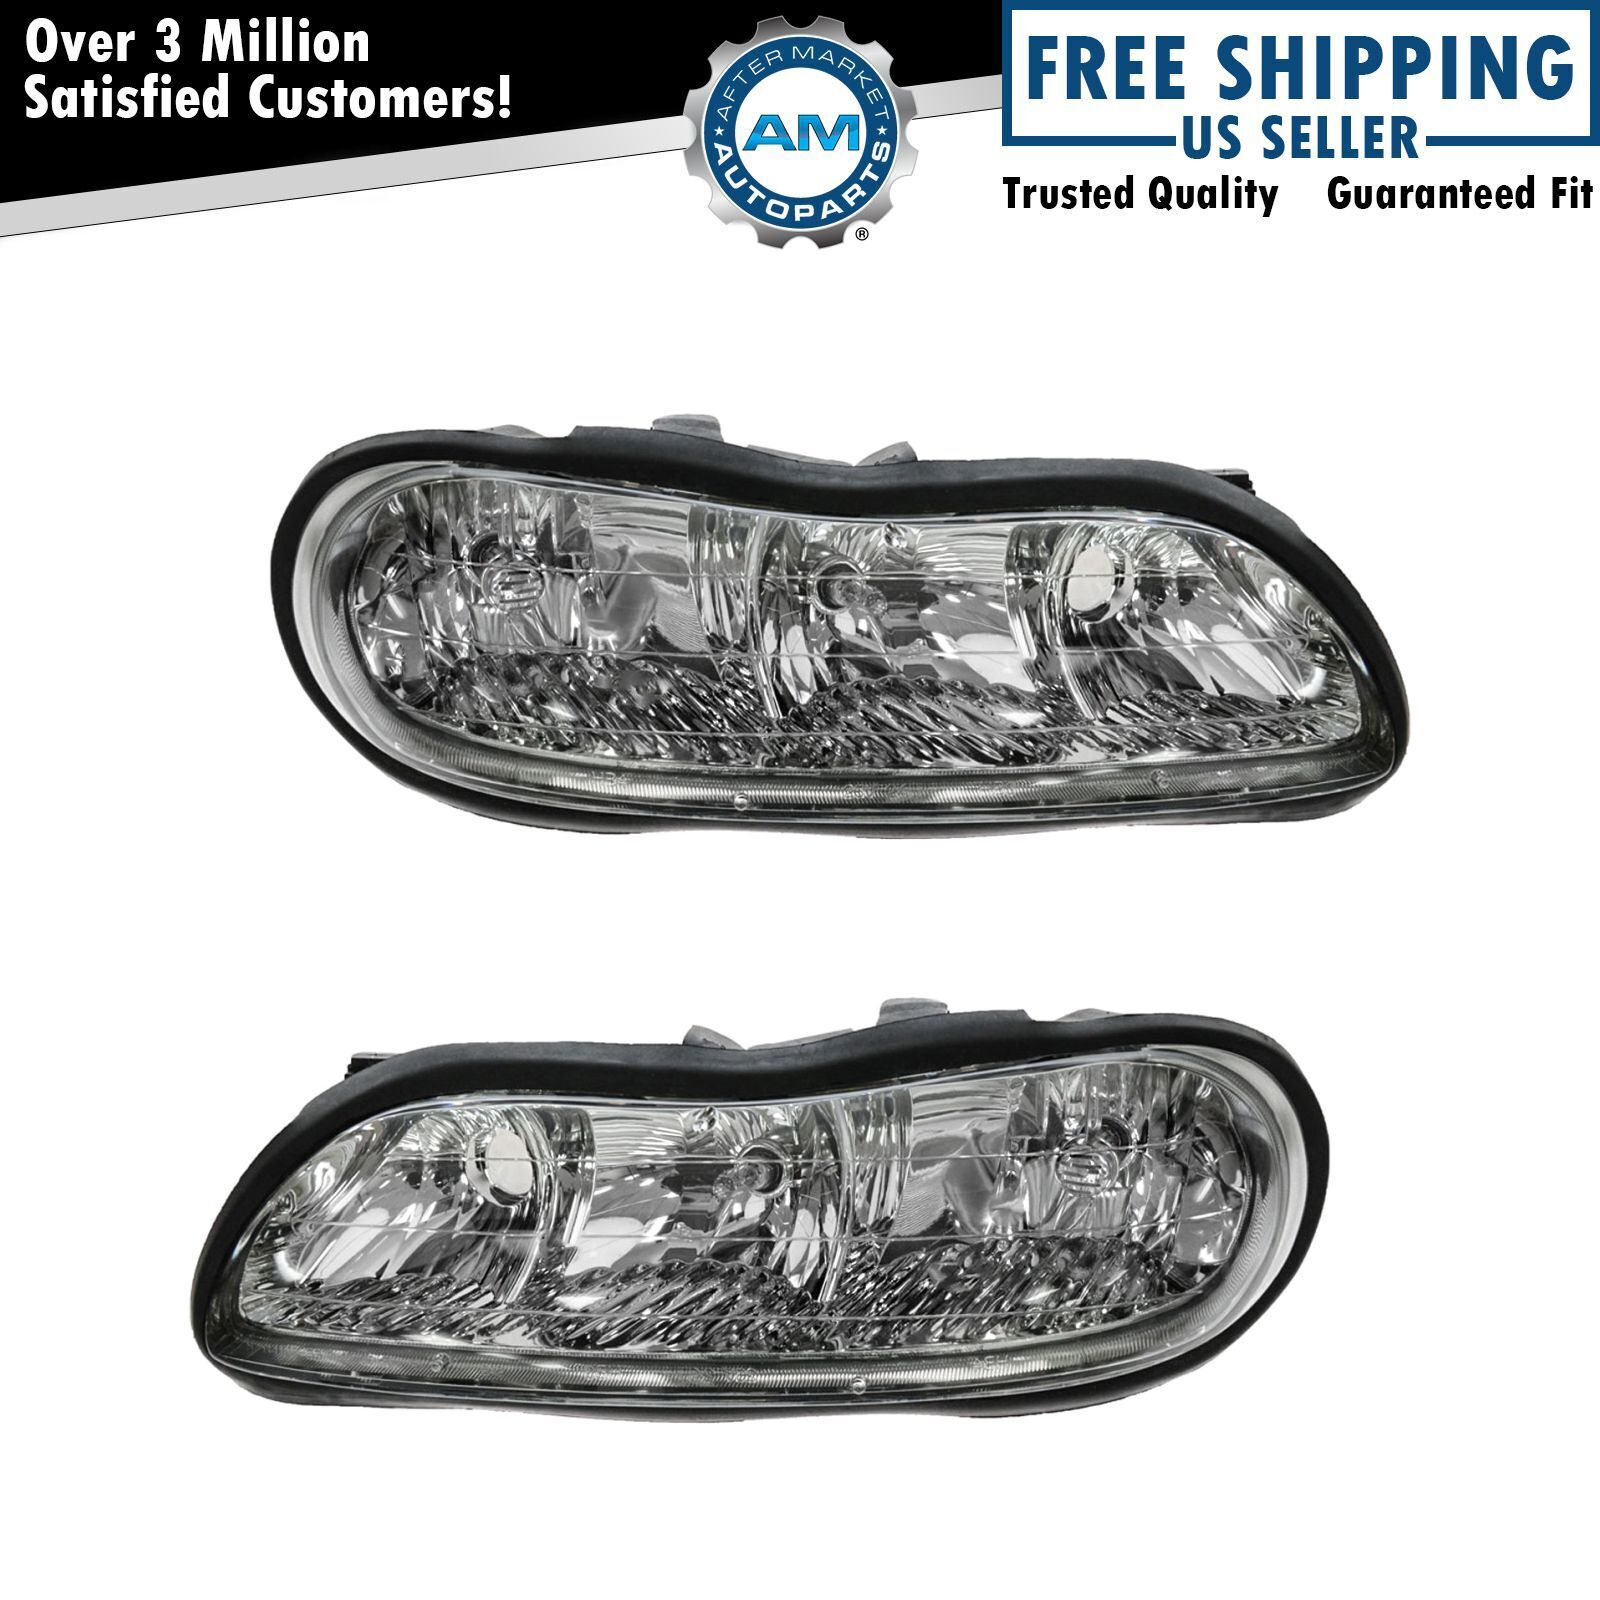 Headlights Headlamps Left & Right Pair Set NEW for Chevy Malibu Olds Cutlass